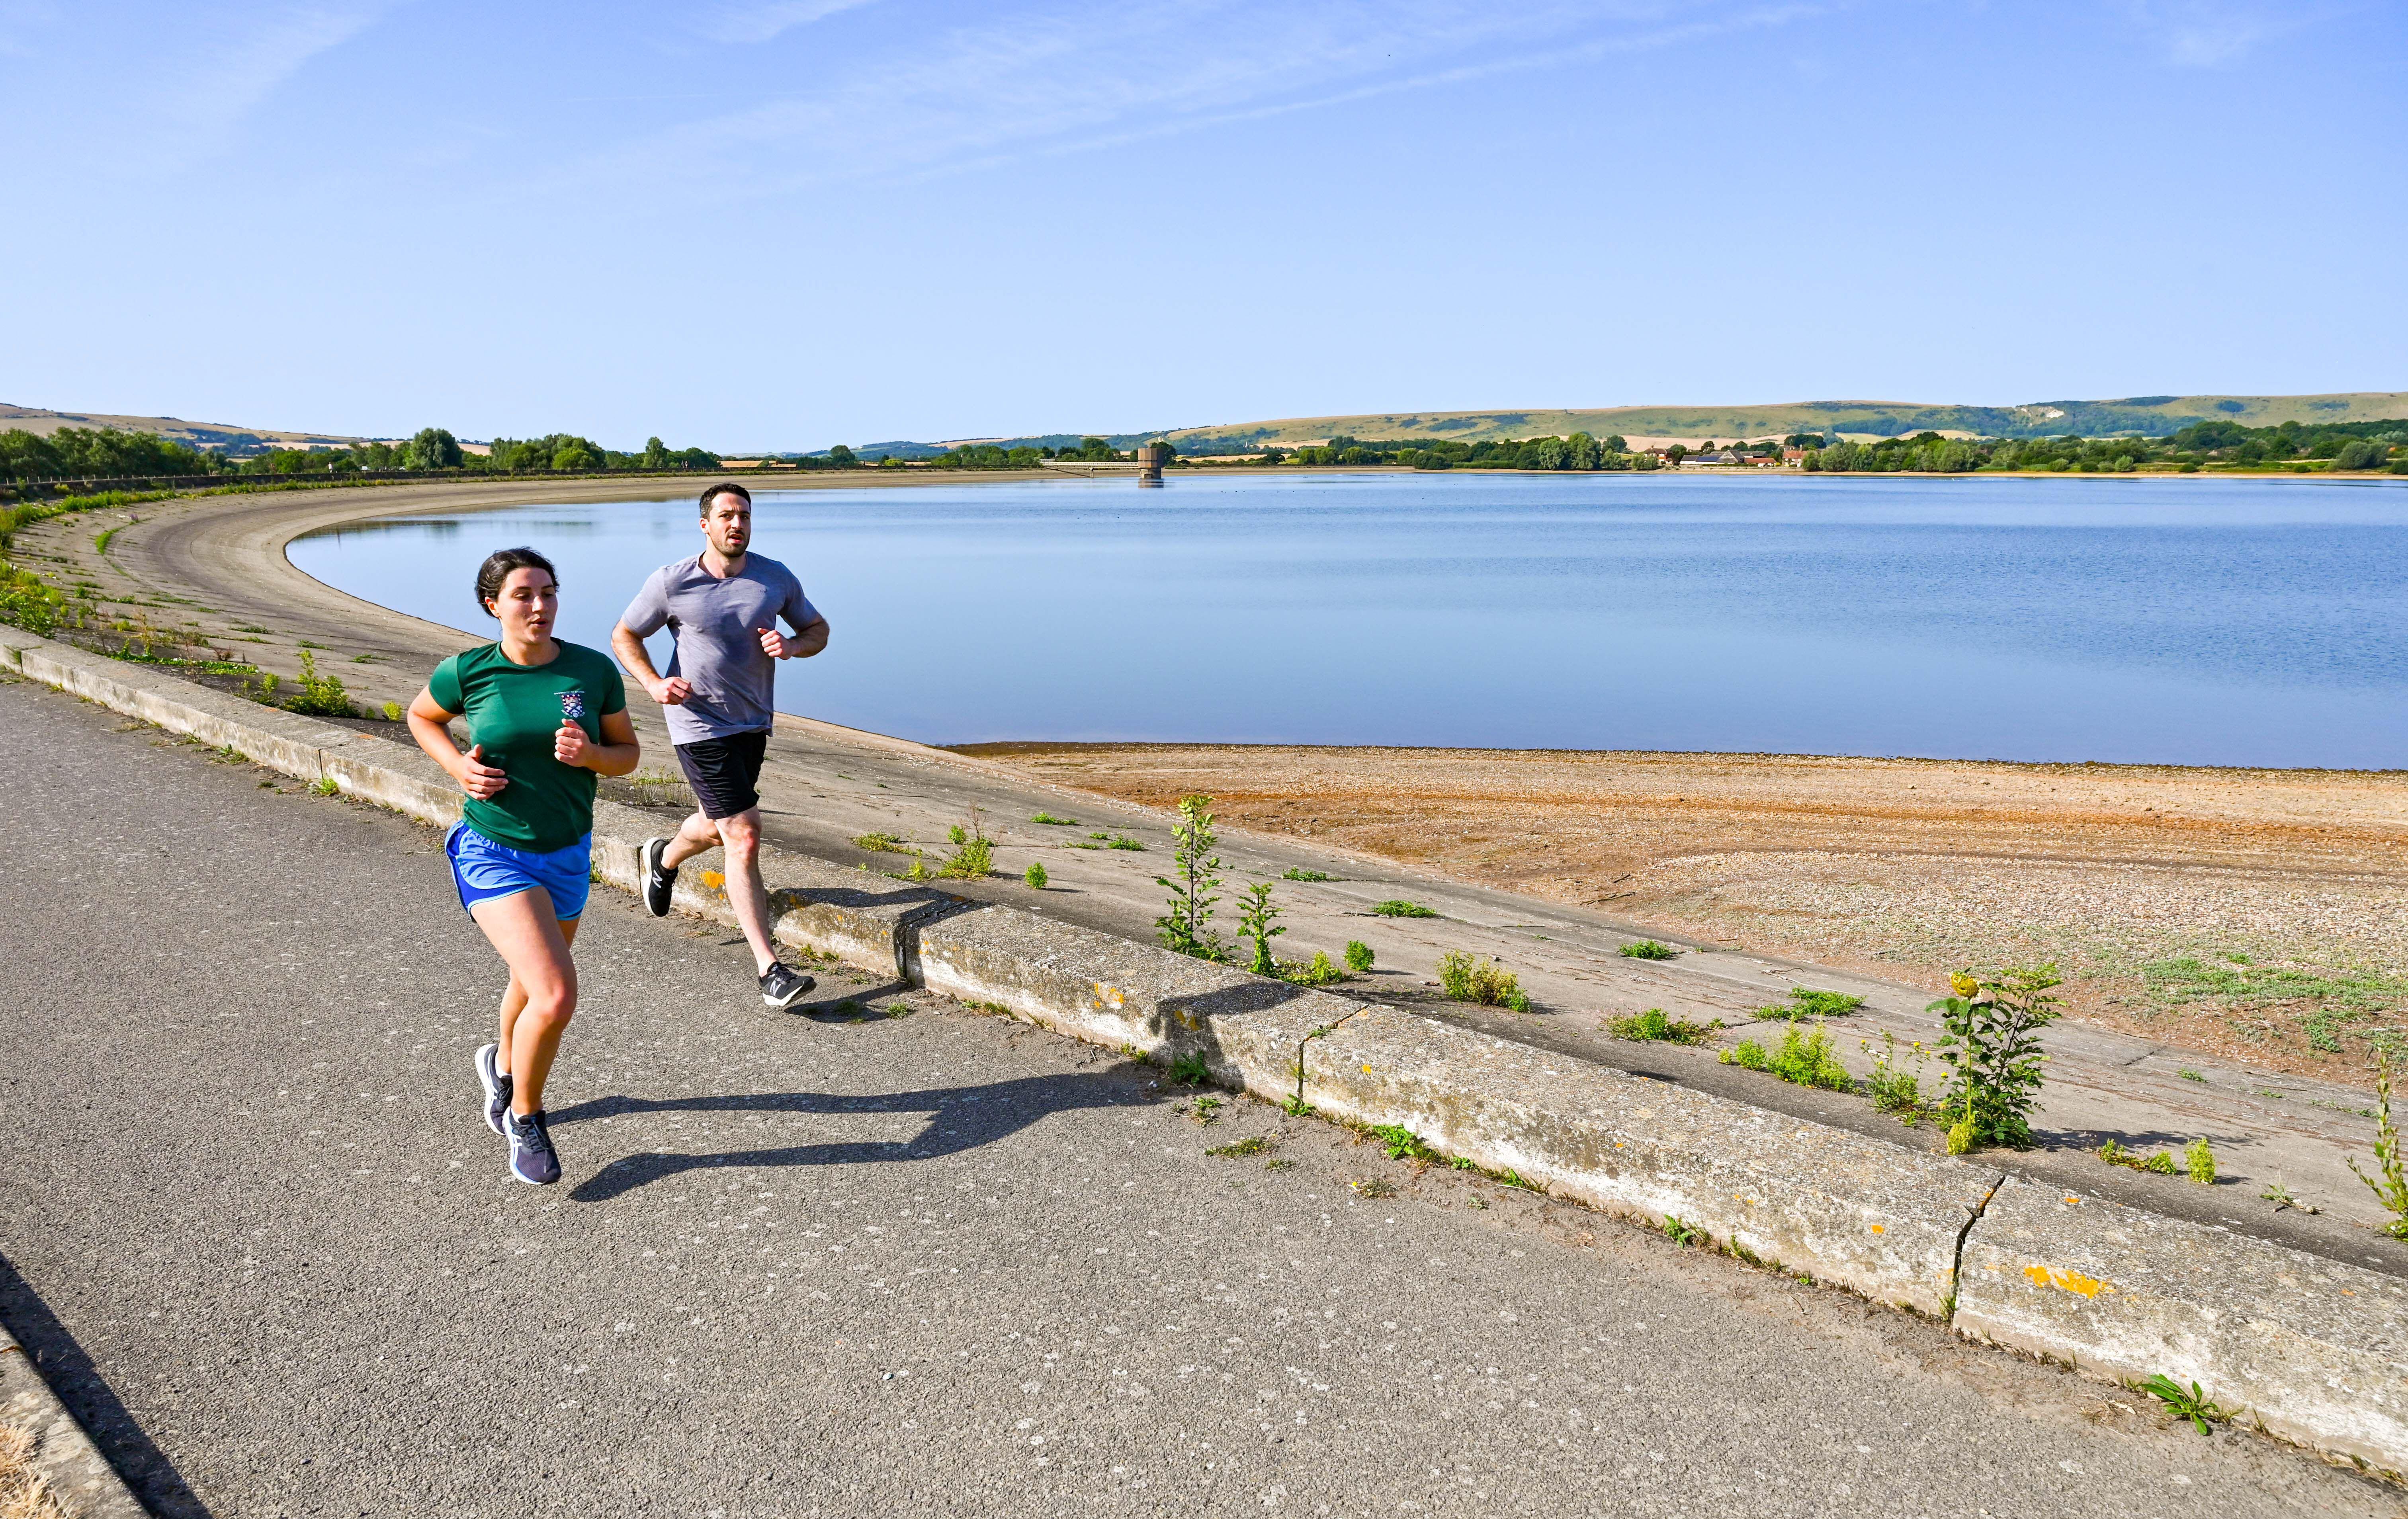 Early morning runners at Arlington Reservoir near Lewes in East Sussex in July (Simon Dack News/Alamy/PA)